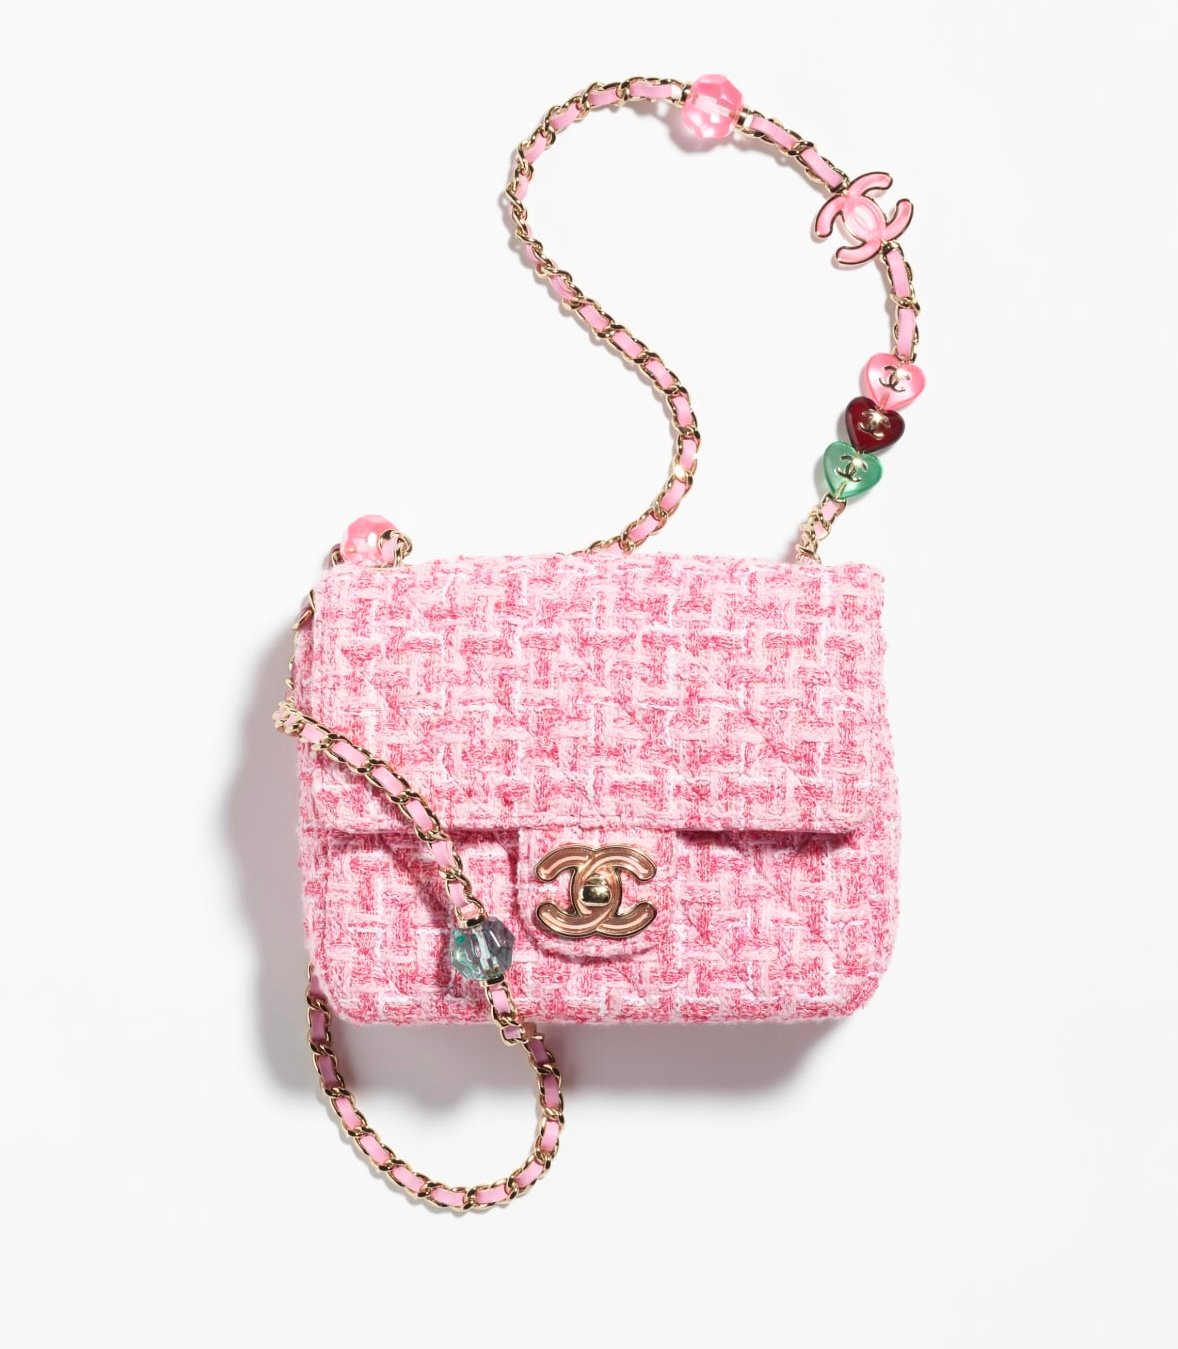 CHANEL Cruise 2022 Collection Luxury Shopping  New Bags, Shoes,  Accessories, Jewellery, RTW 22C 